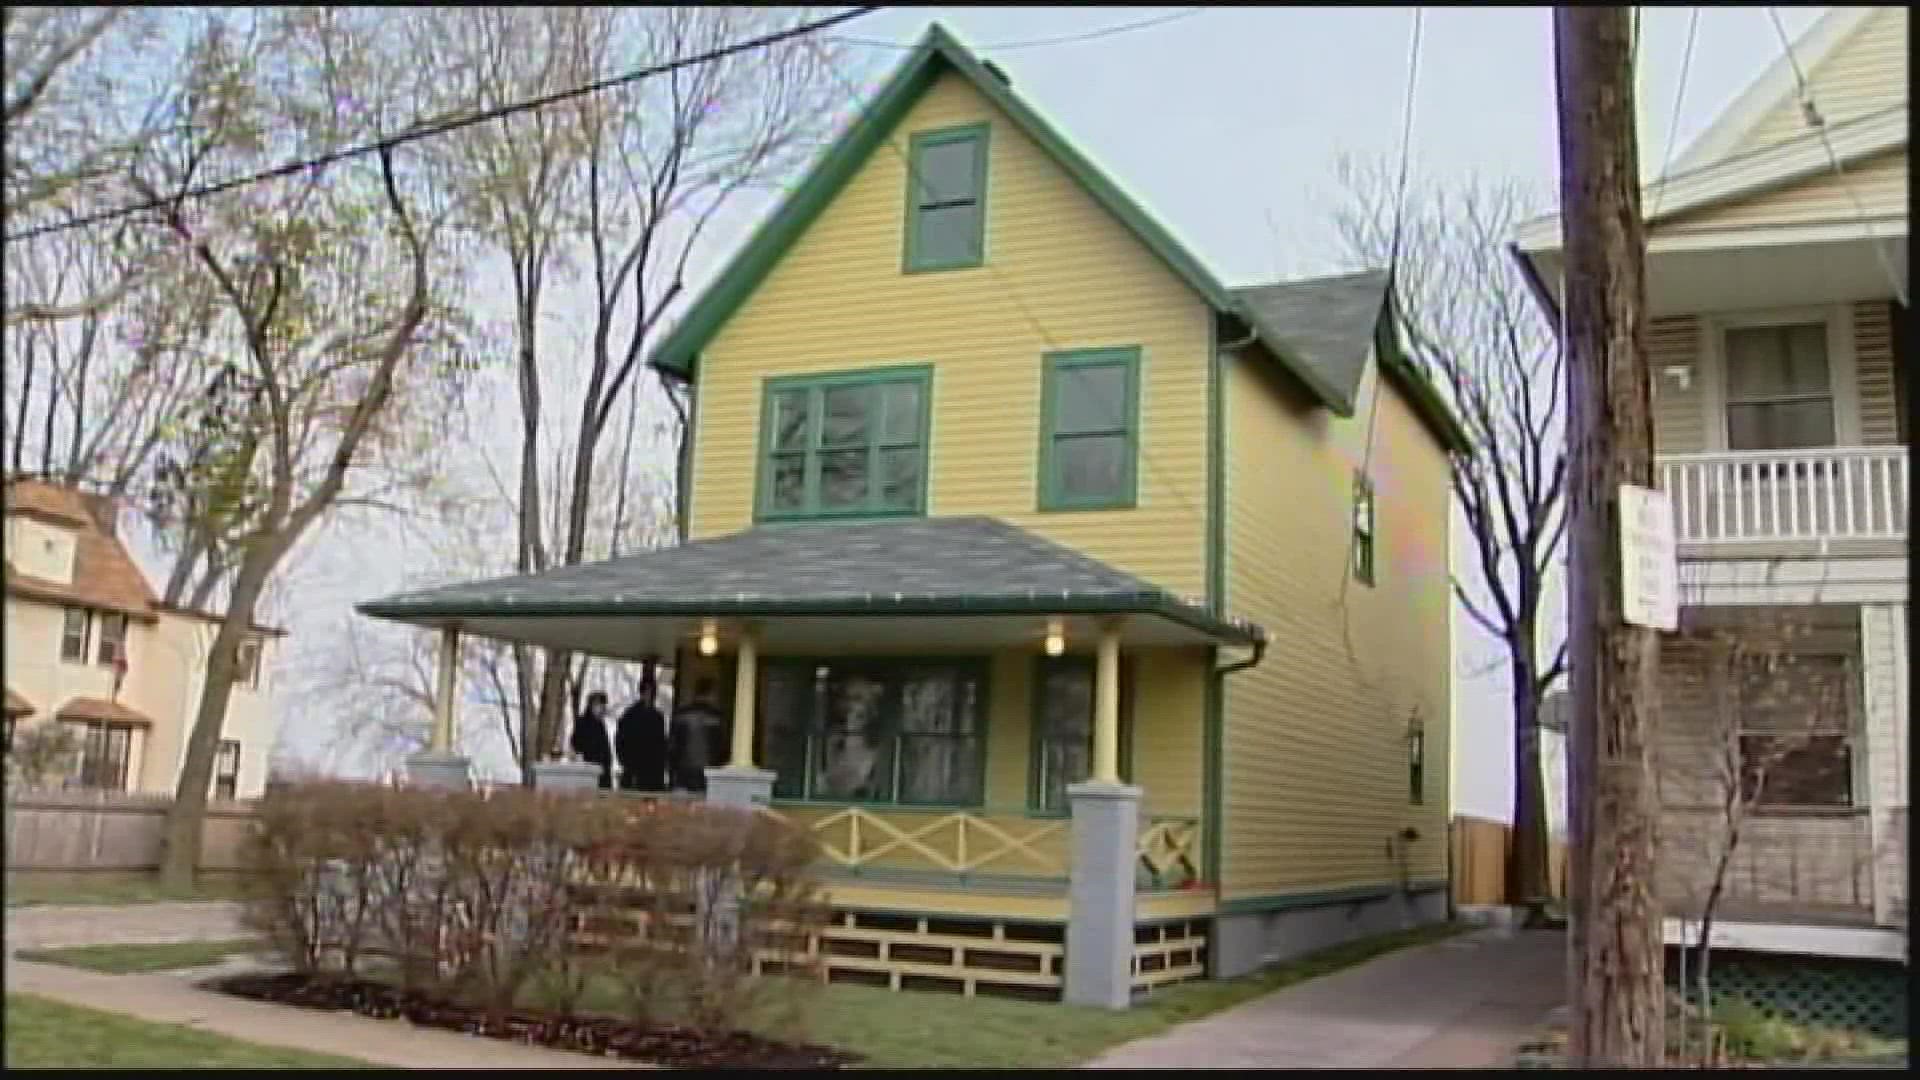 The house famously used in A Christmas Story is up for sale in Cleveland. Here’s file video from the house throughout the years.